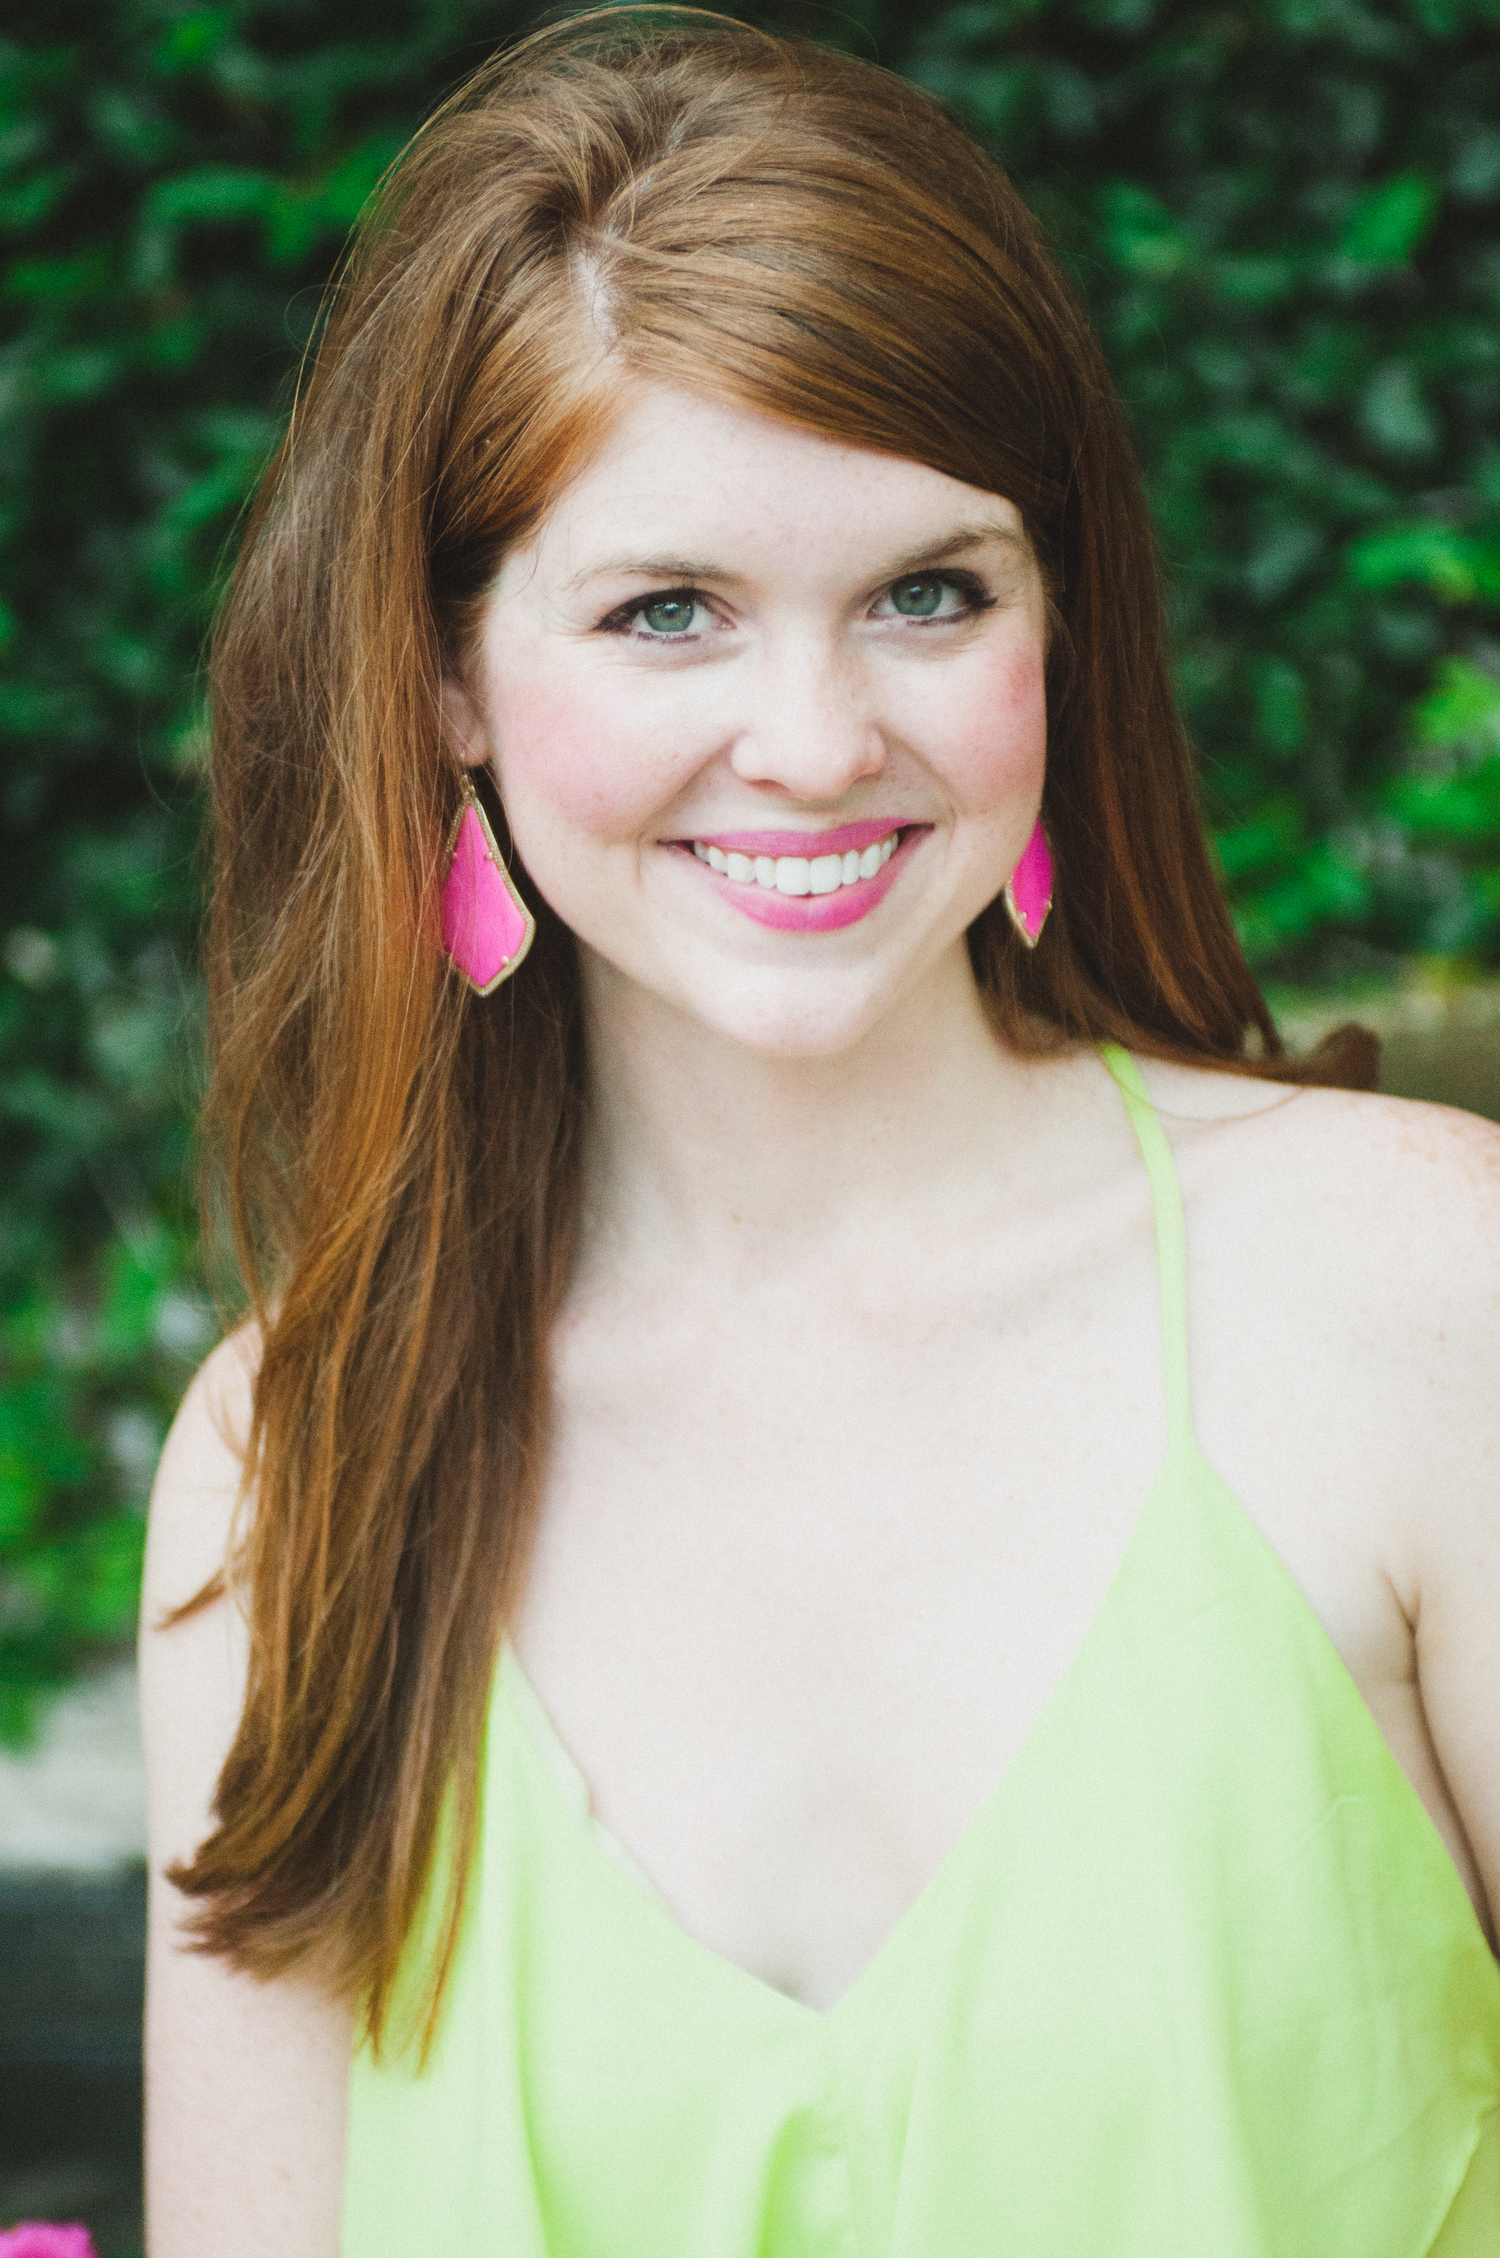 Green Dress, Pink Accents, Balloons, Party, Birthday | Southern Elle Style | Dallas Fashion Blogger